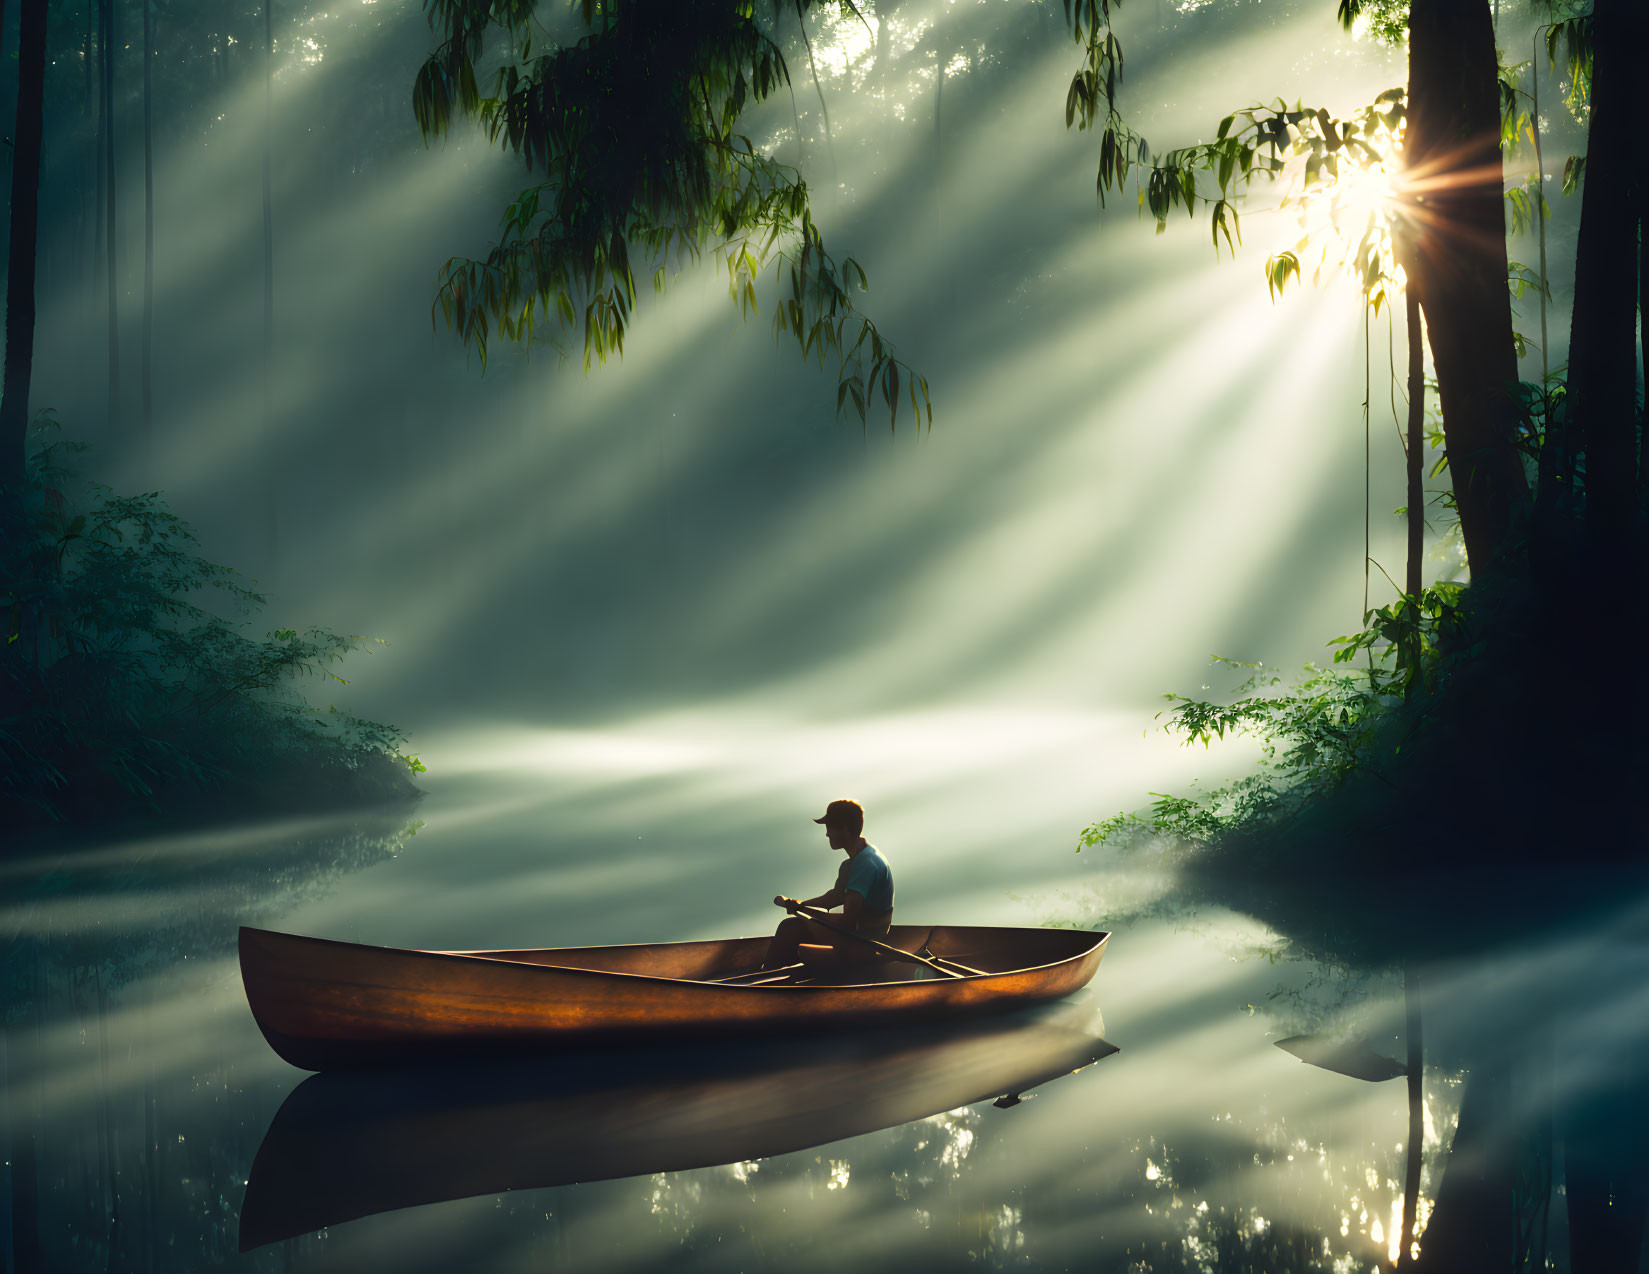 Tranquil lake scene with person in canoe and sunbeams filtering through mist